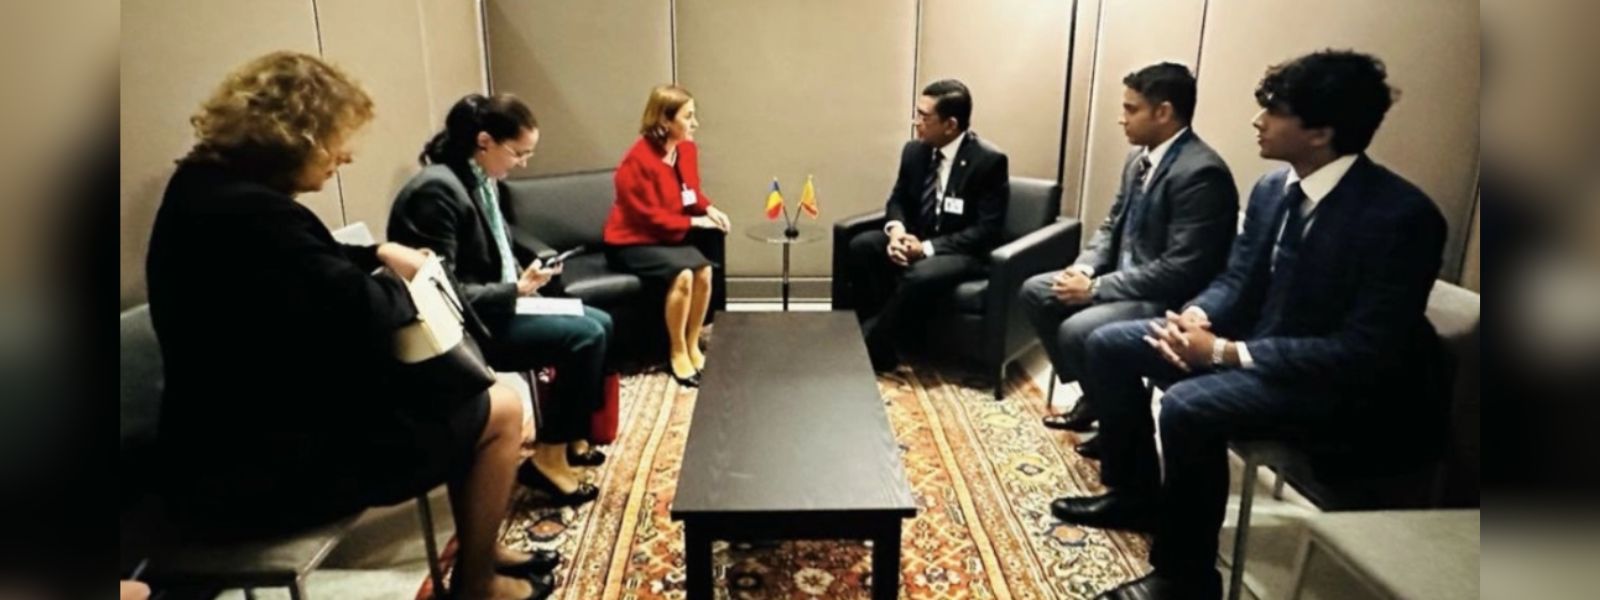 Foreign Minister clarifies presence of family member at UN General Assembly in New York